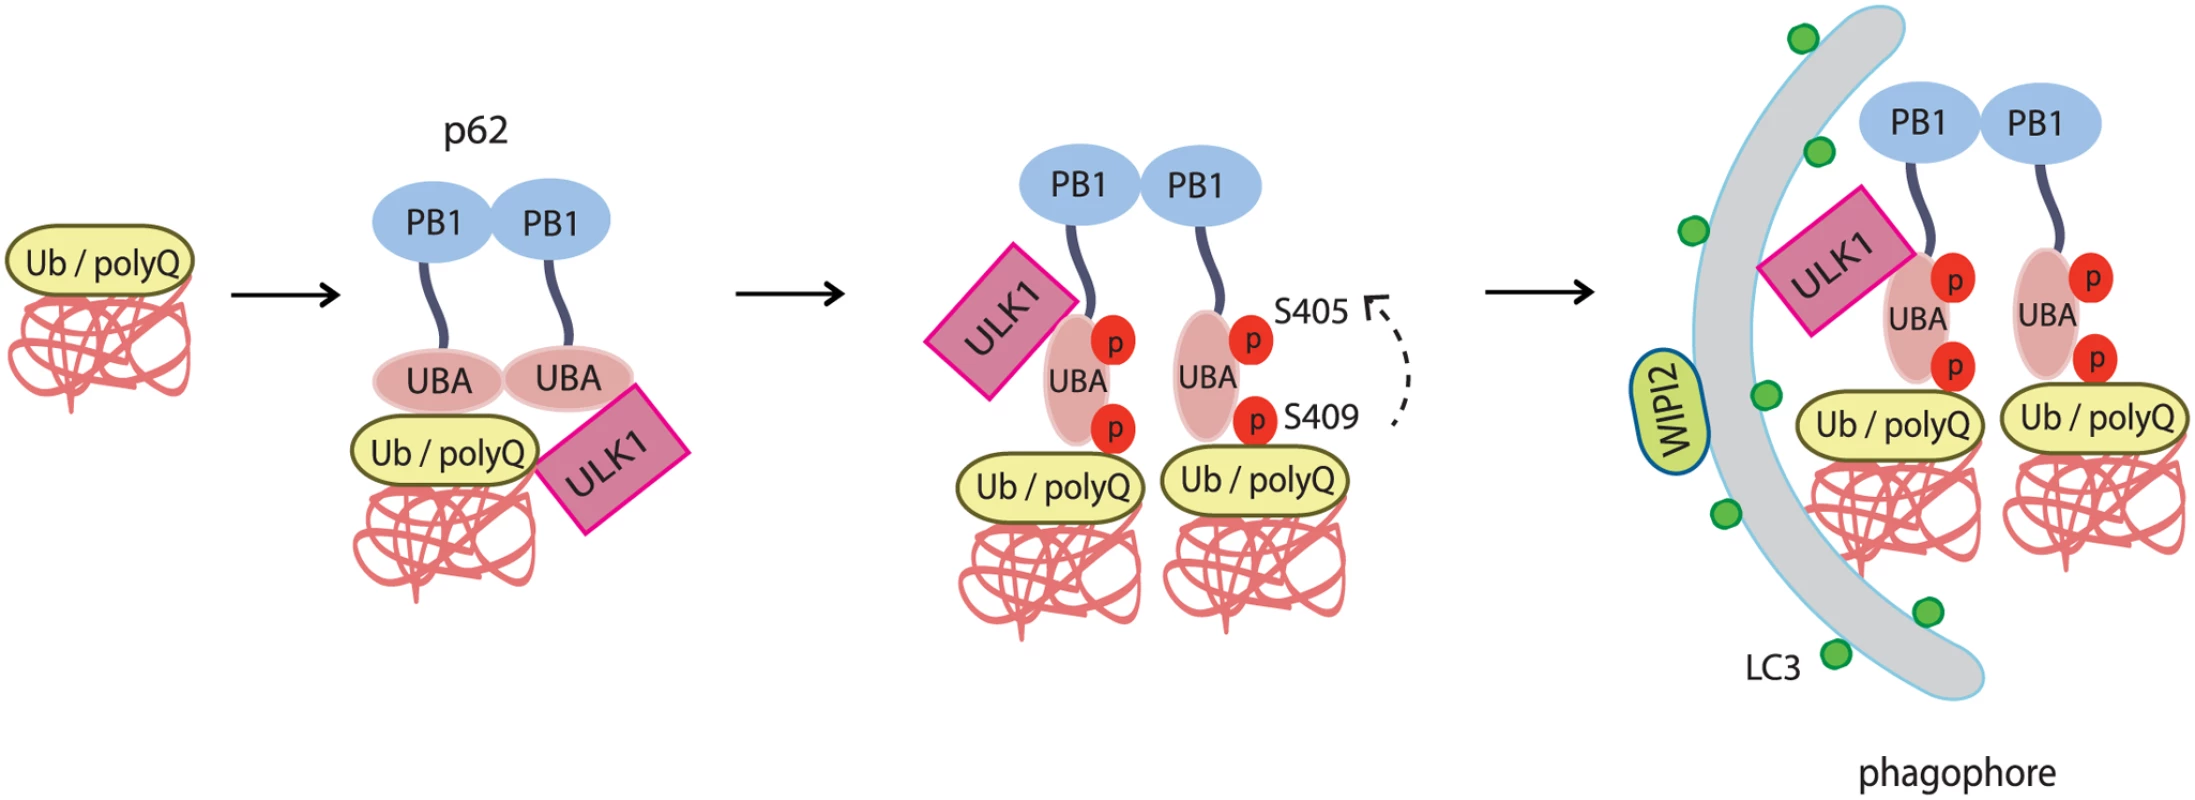 The working model for ULK1-mediated p-S409 and p-S405 of p62 in selective degradation of ubiquitinated proteins and polyglutamine-expanded proteins.